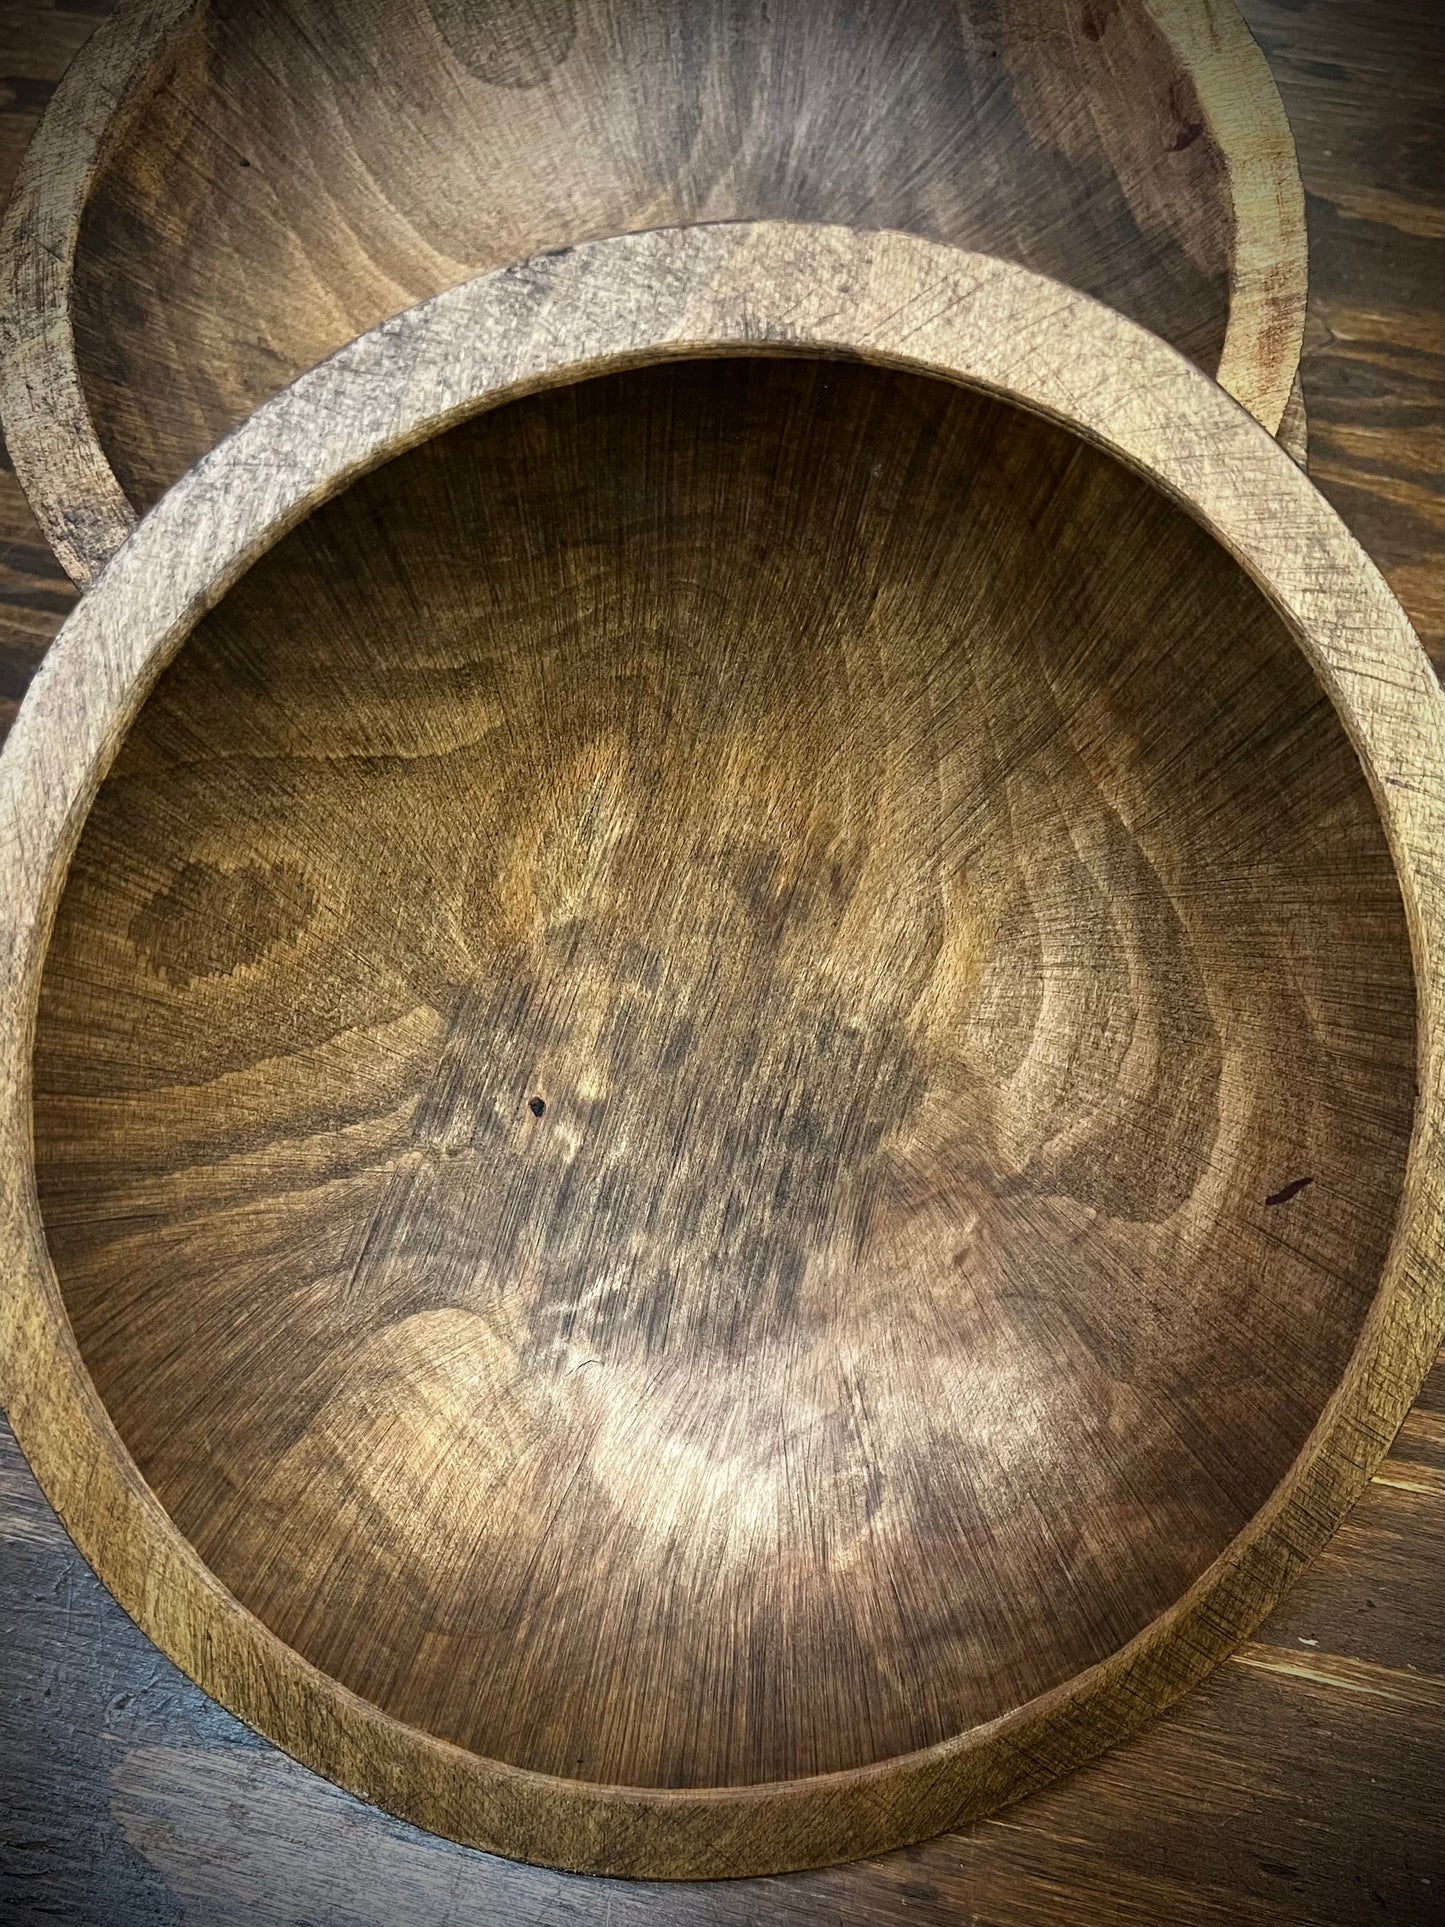 Wooden Bowl, 9" Round/Out of Round